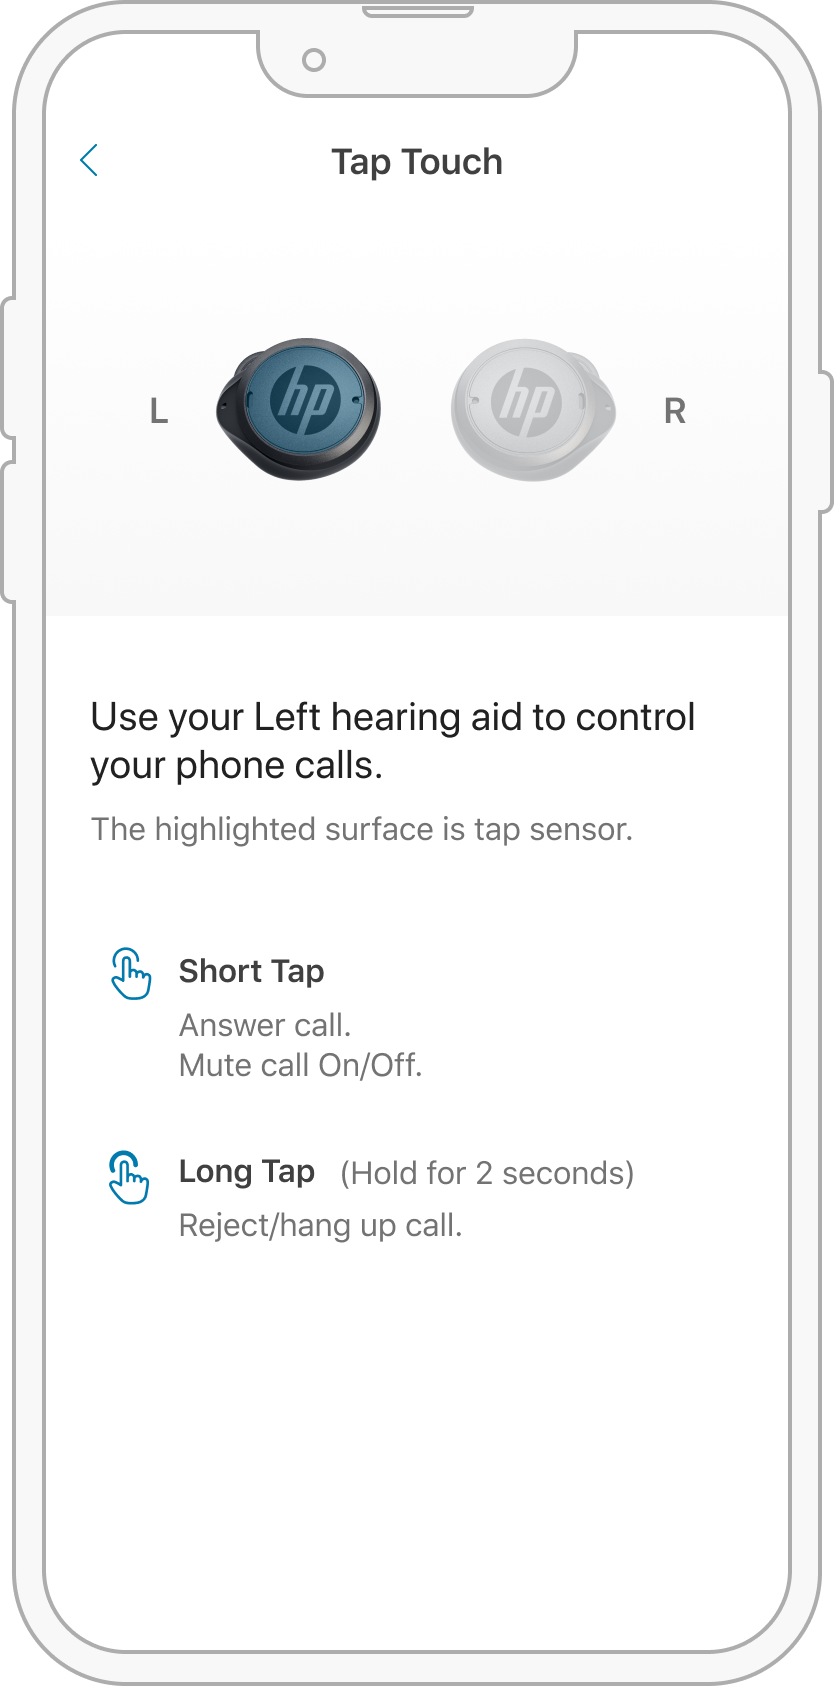 USR-SUP-002-47_-_HP_Hearing_PRO_Support_Asset_____Tap_Touch_Control_for_phone_calls-v1.0.png